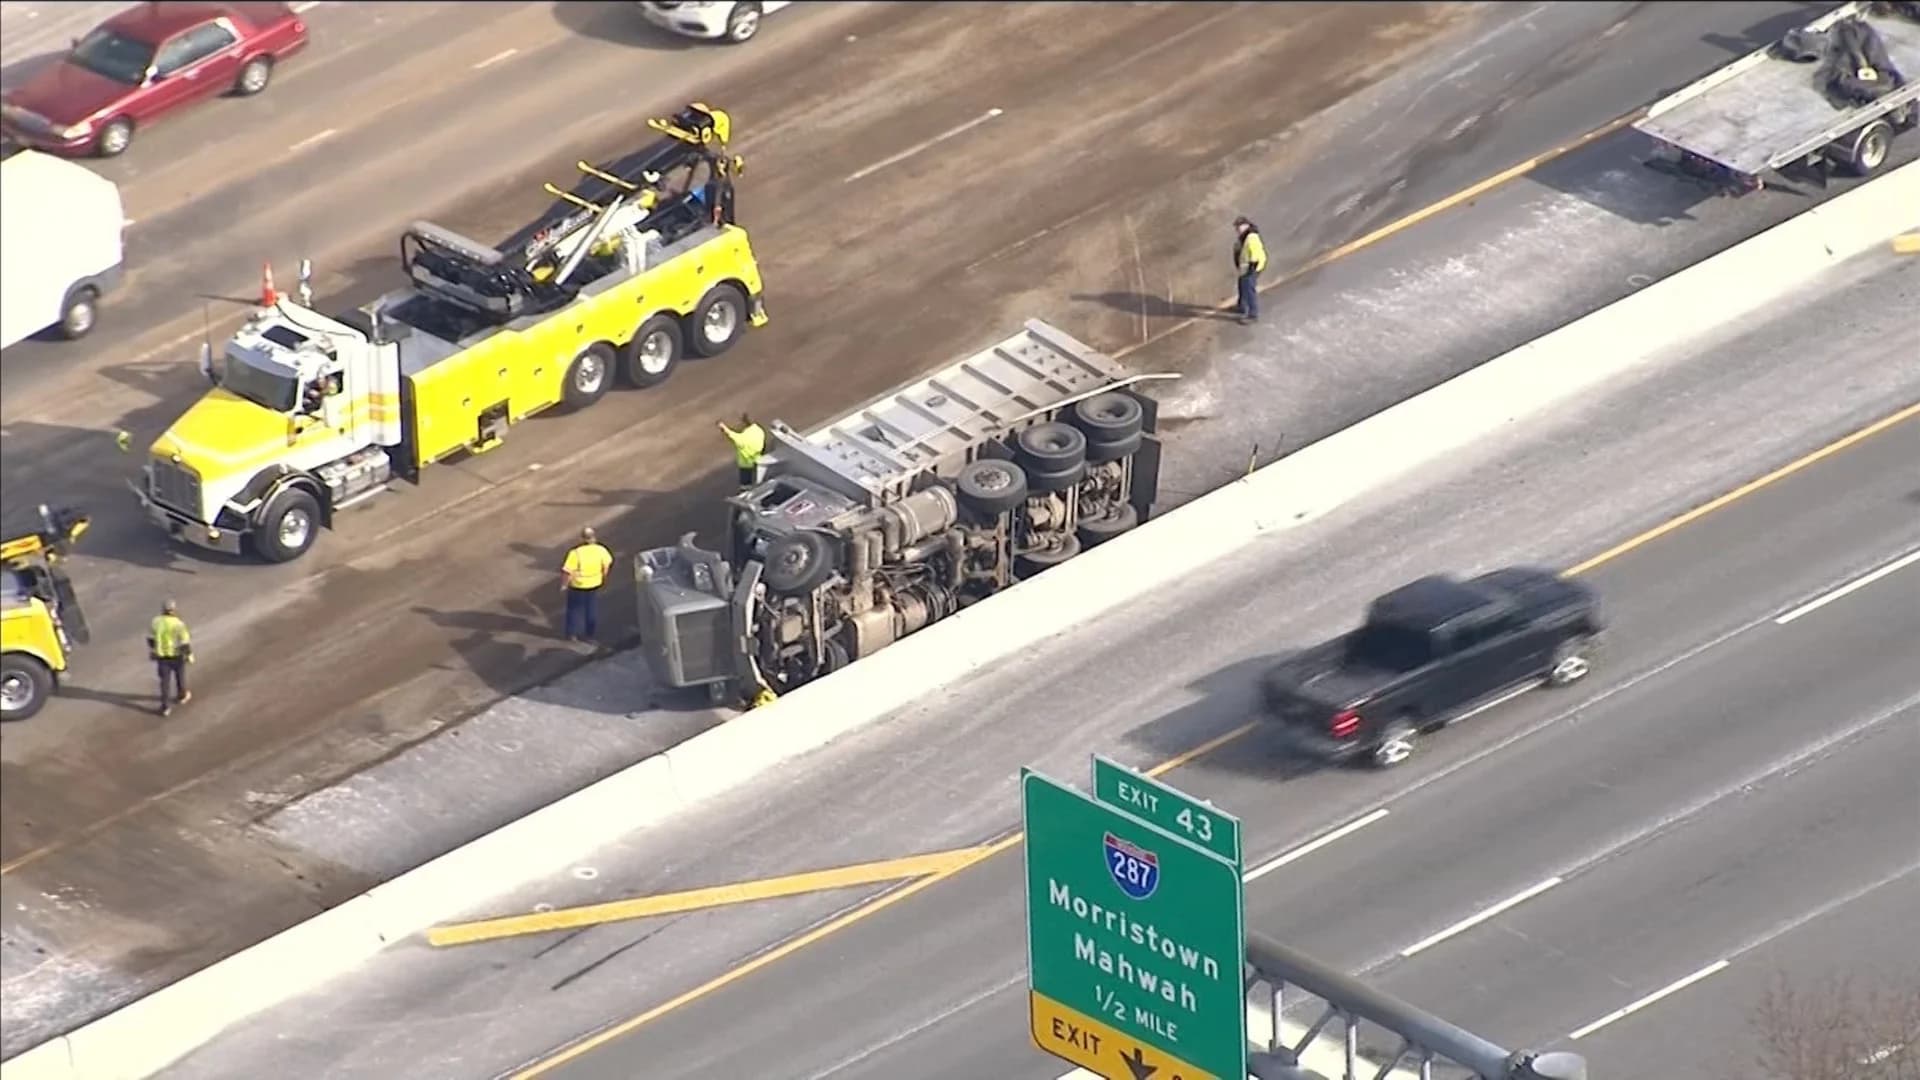 Overturned dump truck causes traffic problems on I-80